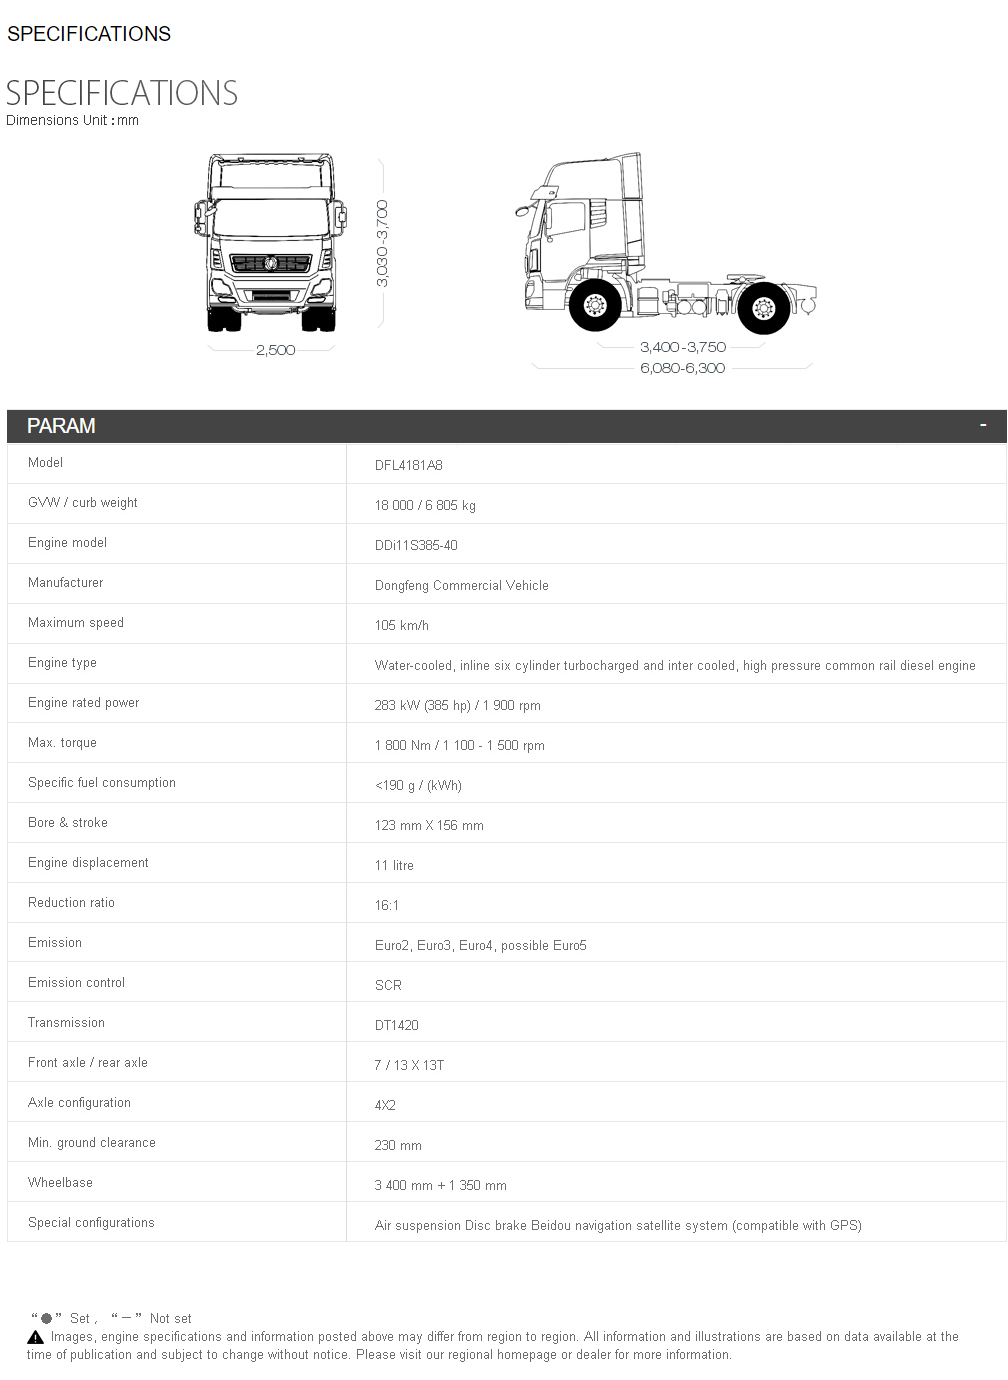 dongfeng KL_dongfeng Truck_Dongfeng Motor副本.png